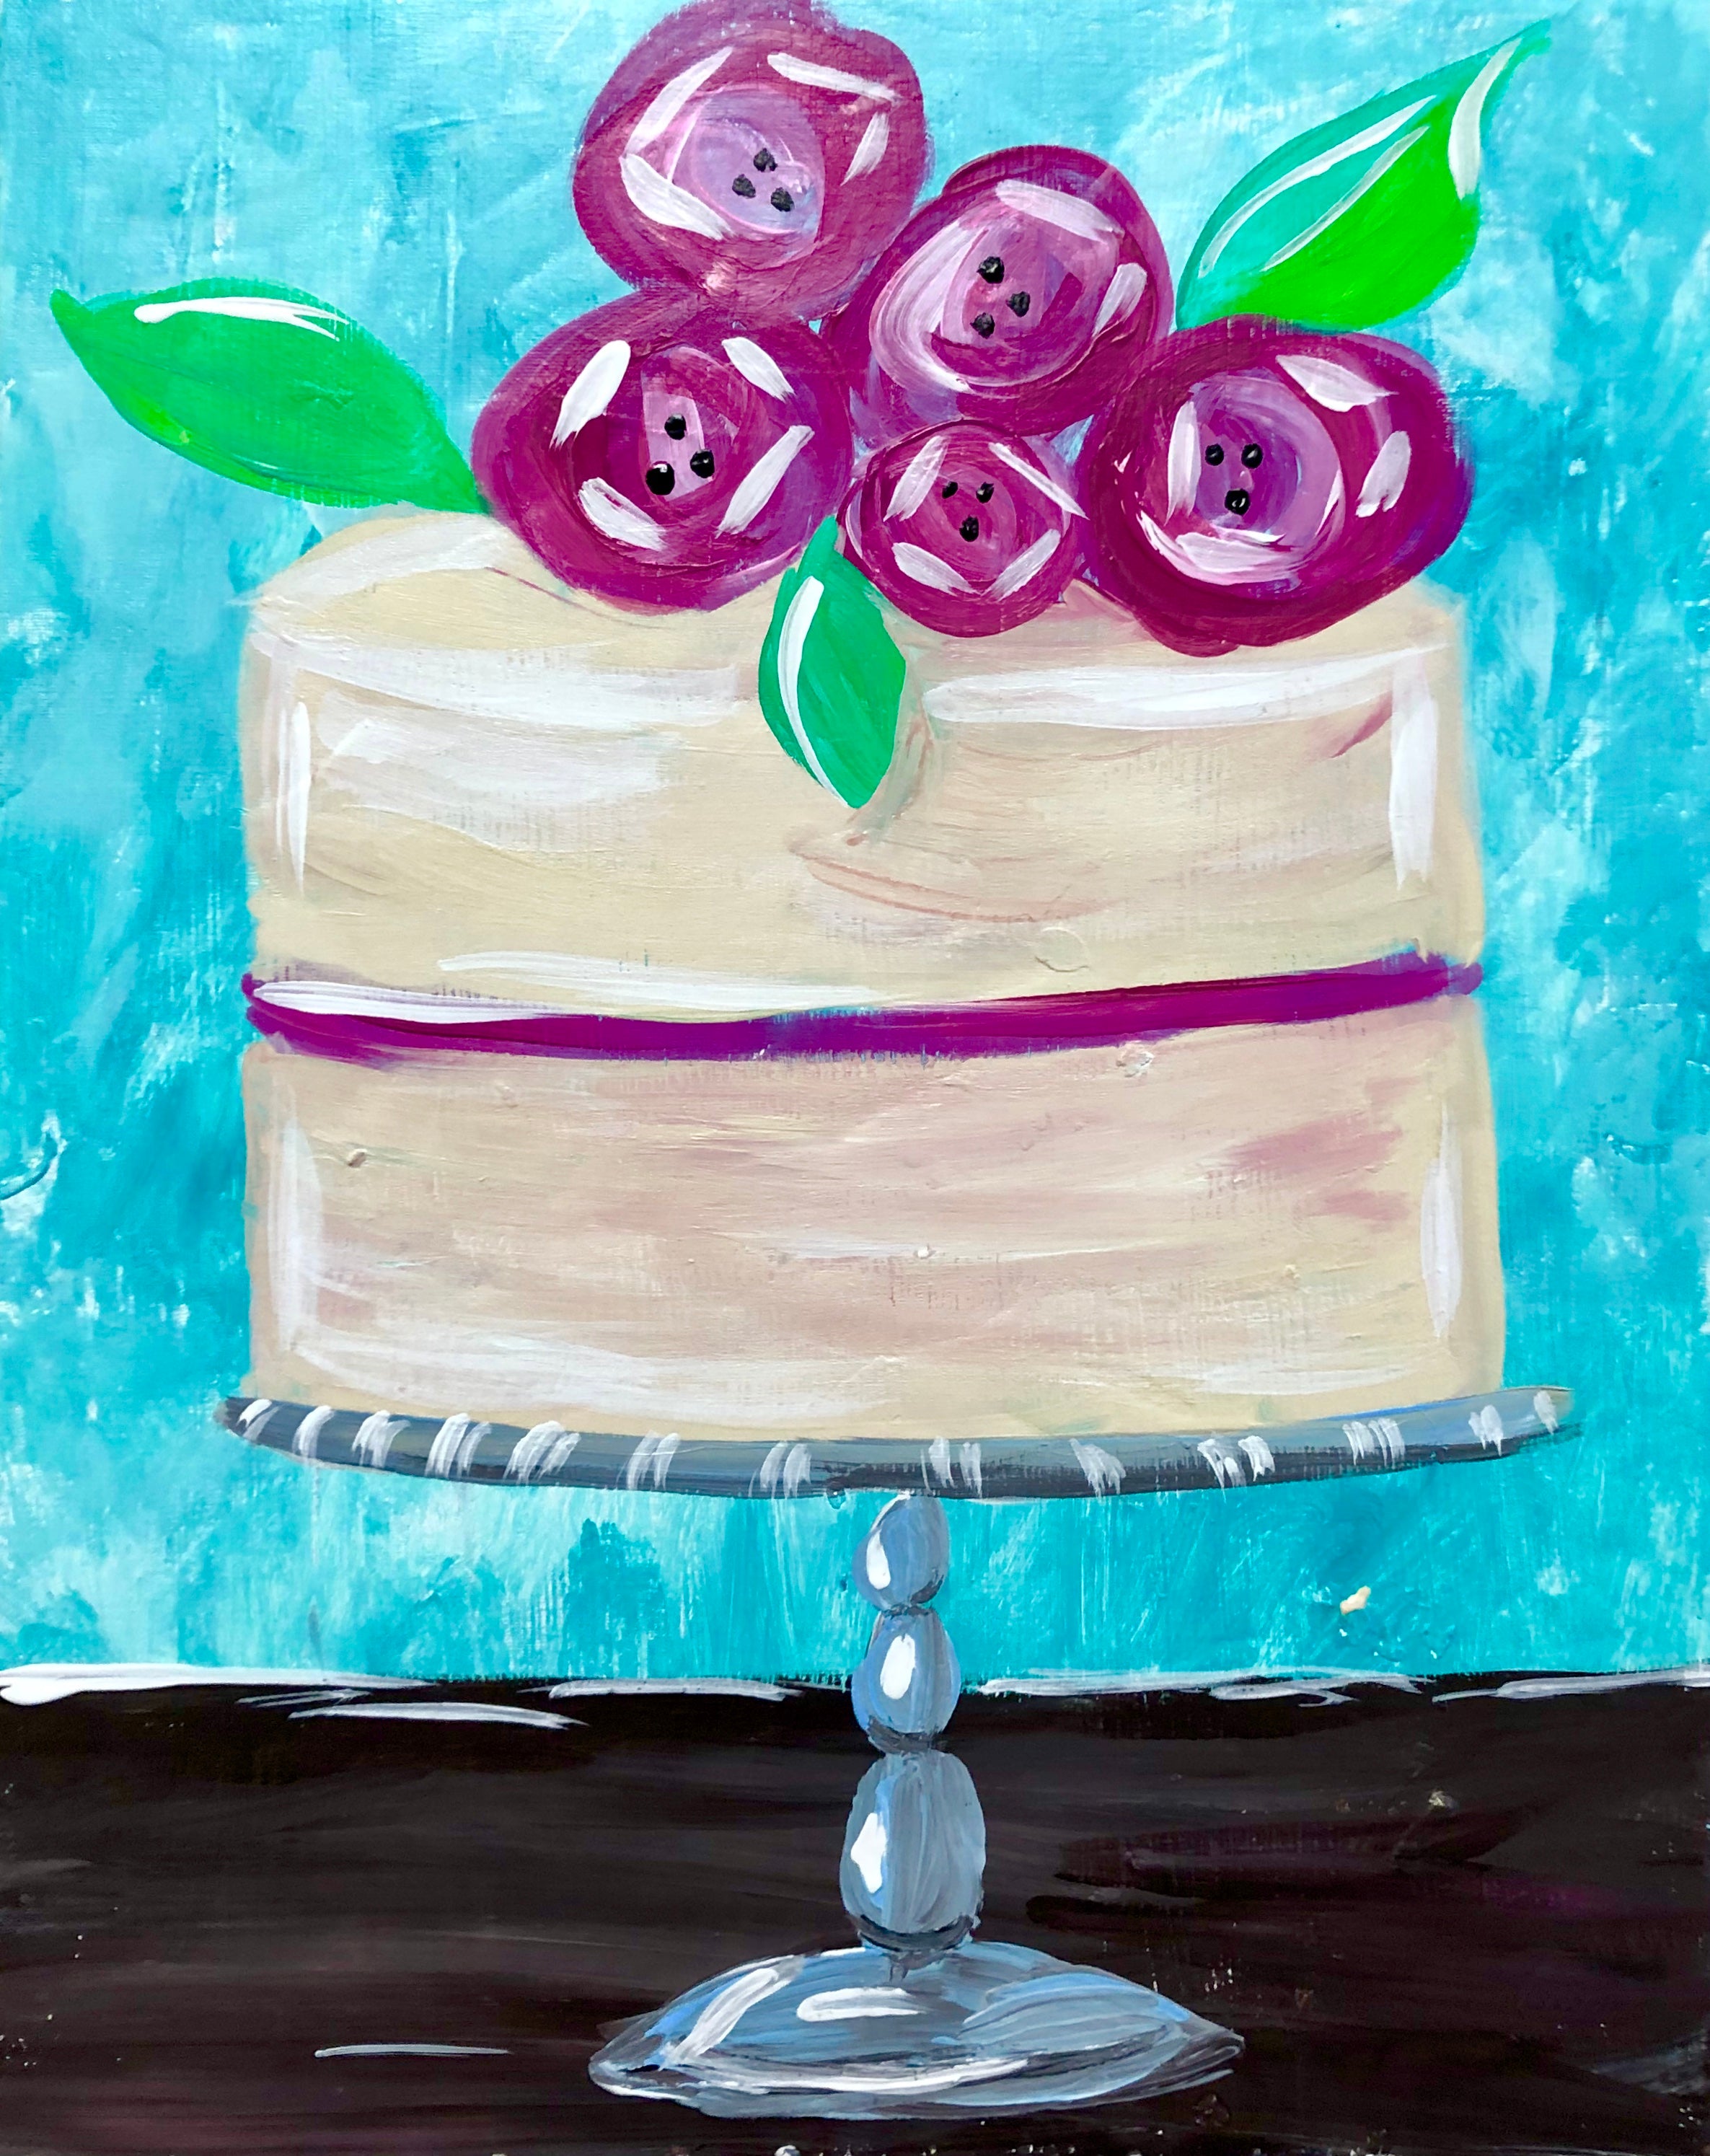 Cake design classes for creatives | Online learning courses